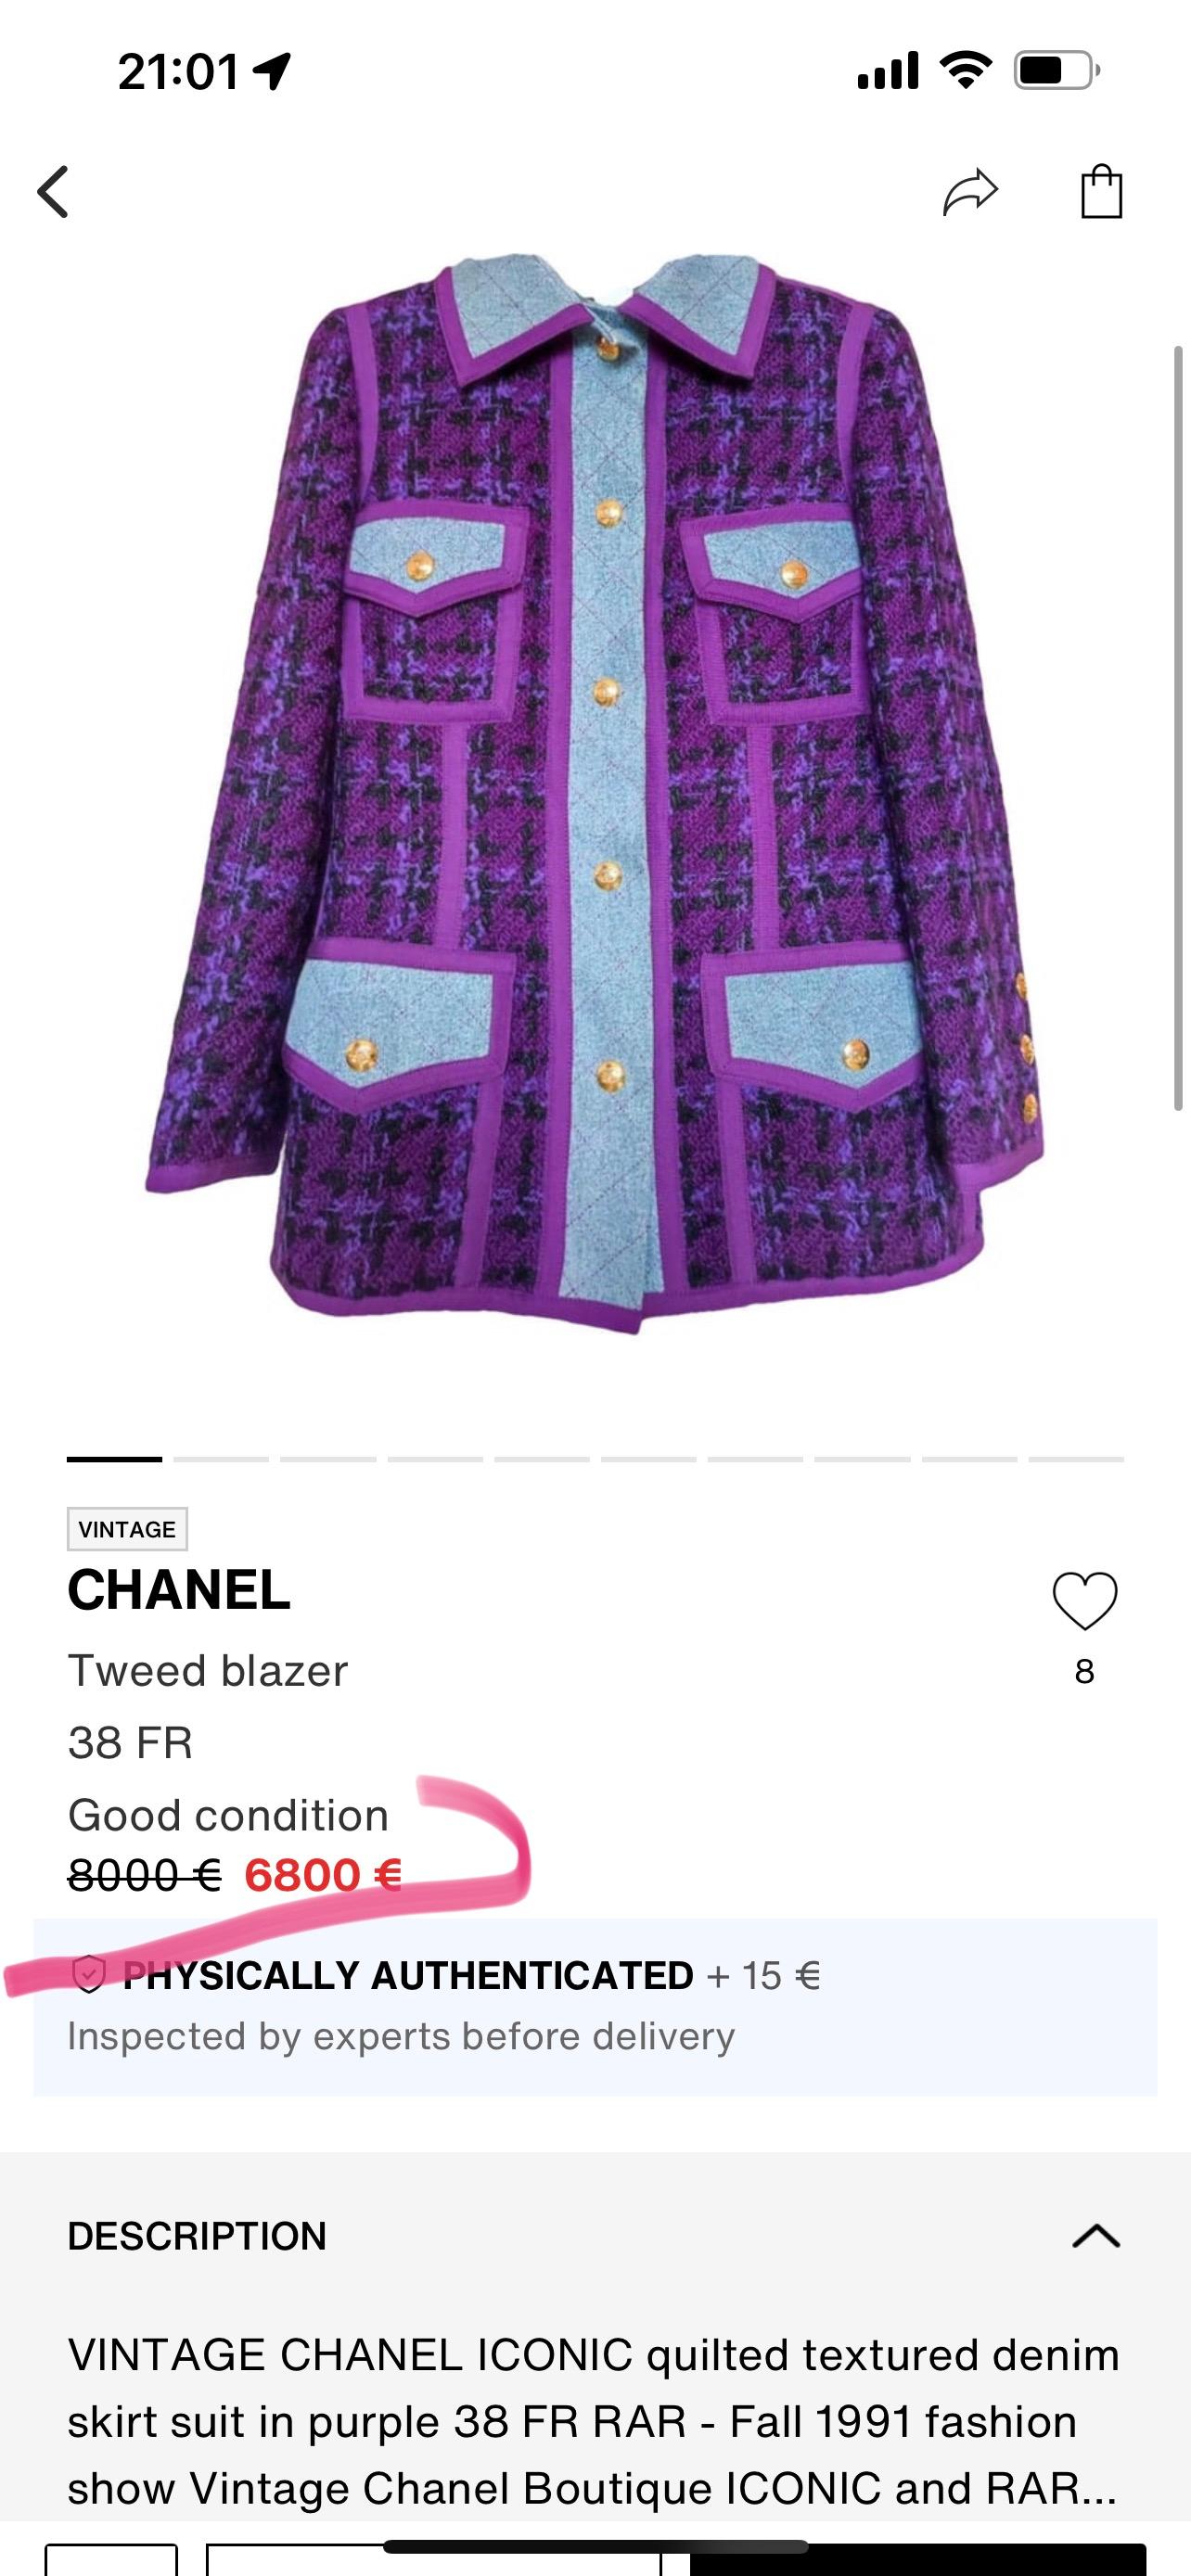 A rare find for true Chanel connoisseurs!
Tweed & Denim jacket and skirt suit set from Runway of 1991 Fall Collection!
The price on other sources 6,000-9,000 $
- CC logo buttons plated with 64K Gold!
- recognisable diamond quilt and denim
Excellent